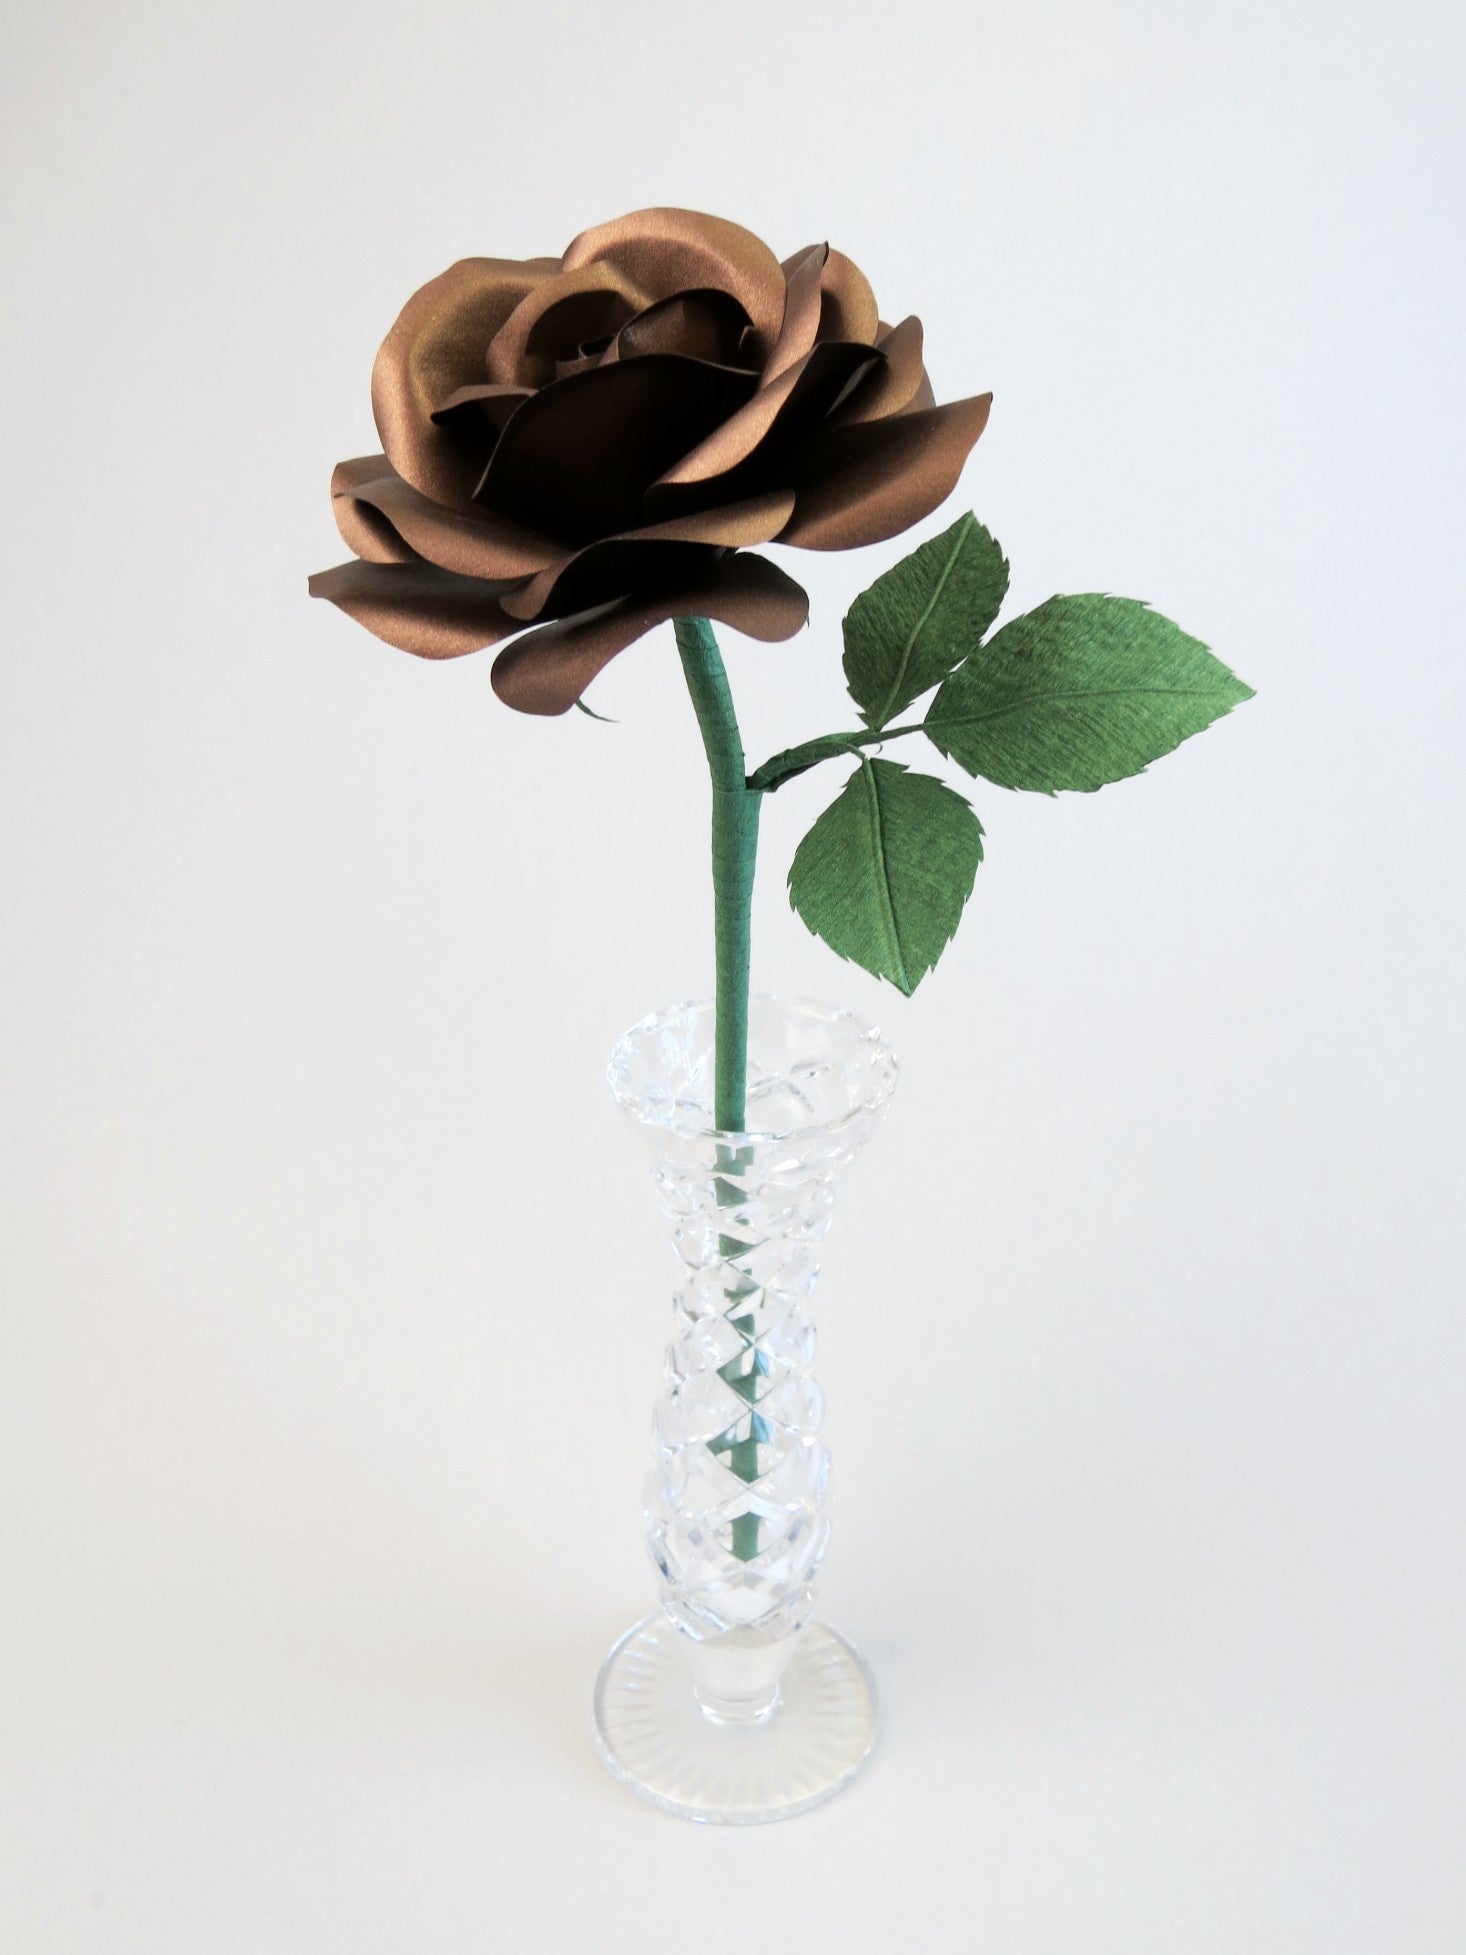 Bronze paper rose with three leaves standing in a narrow glass vase against a light grey backdrop